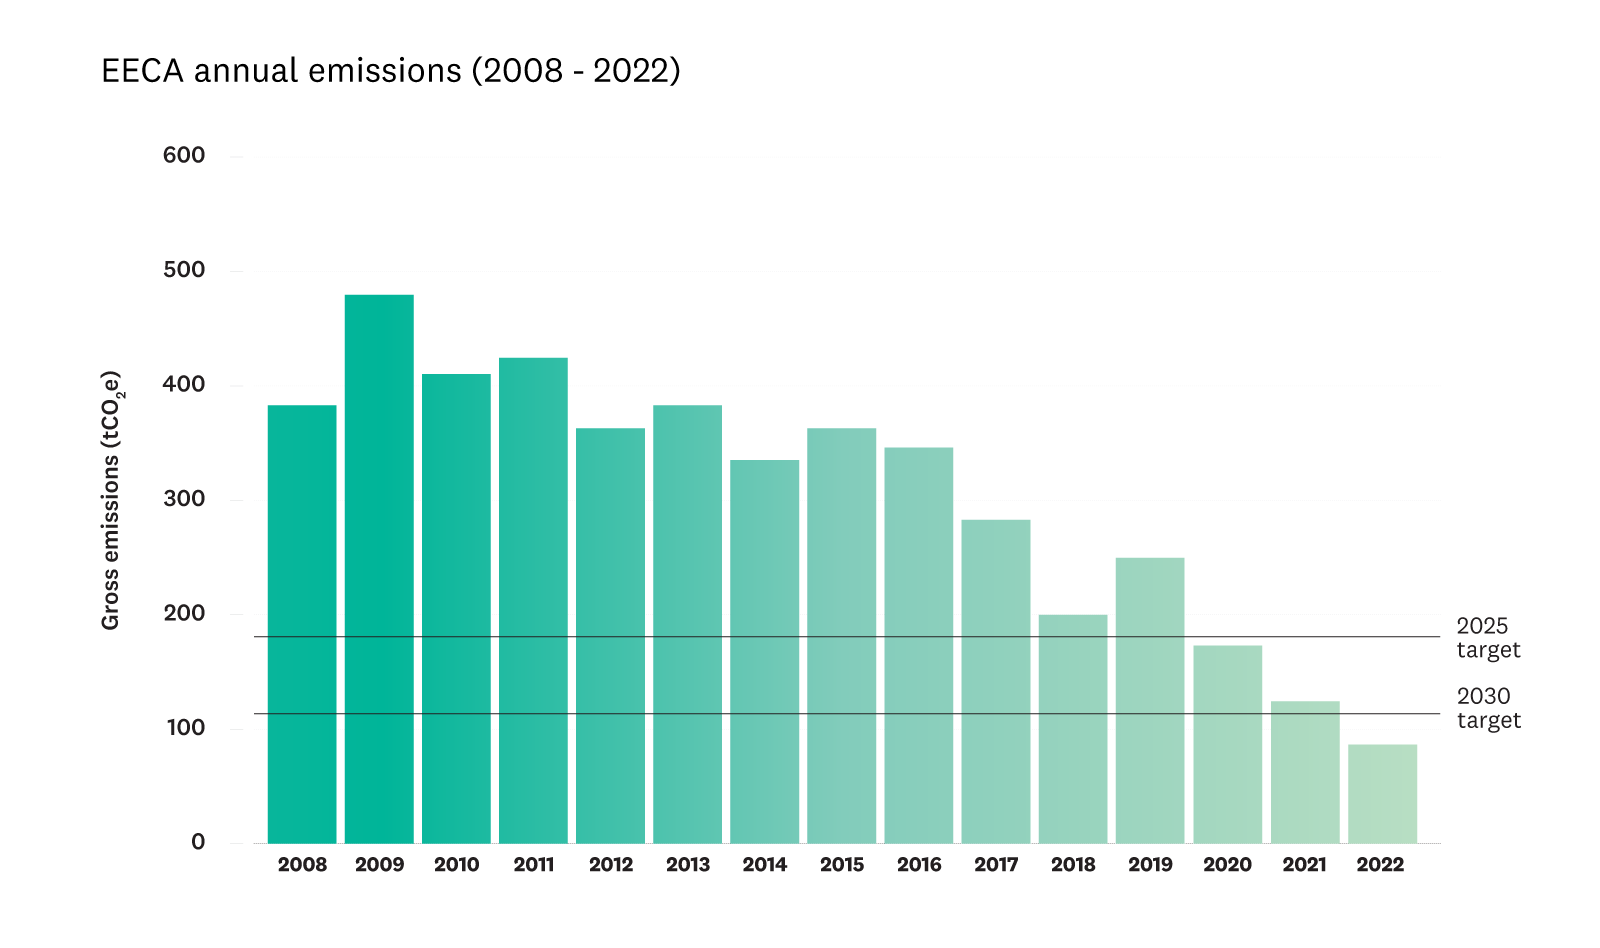 Bar graph showing EECA's annual gross emissions each year from 2008 to 2022 and progress towards 2025 and 2030 targets. 